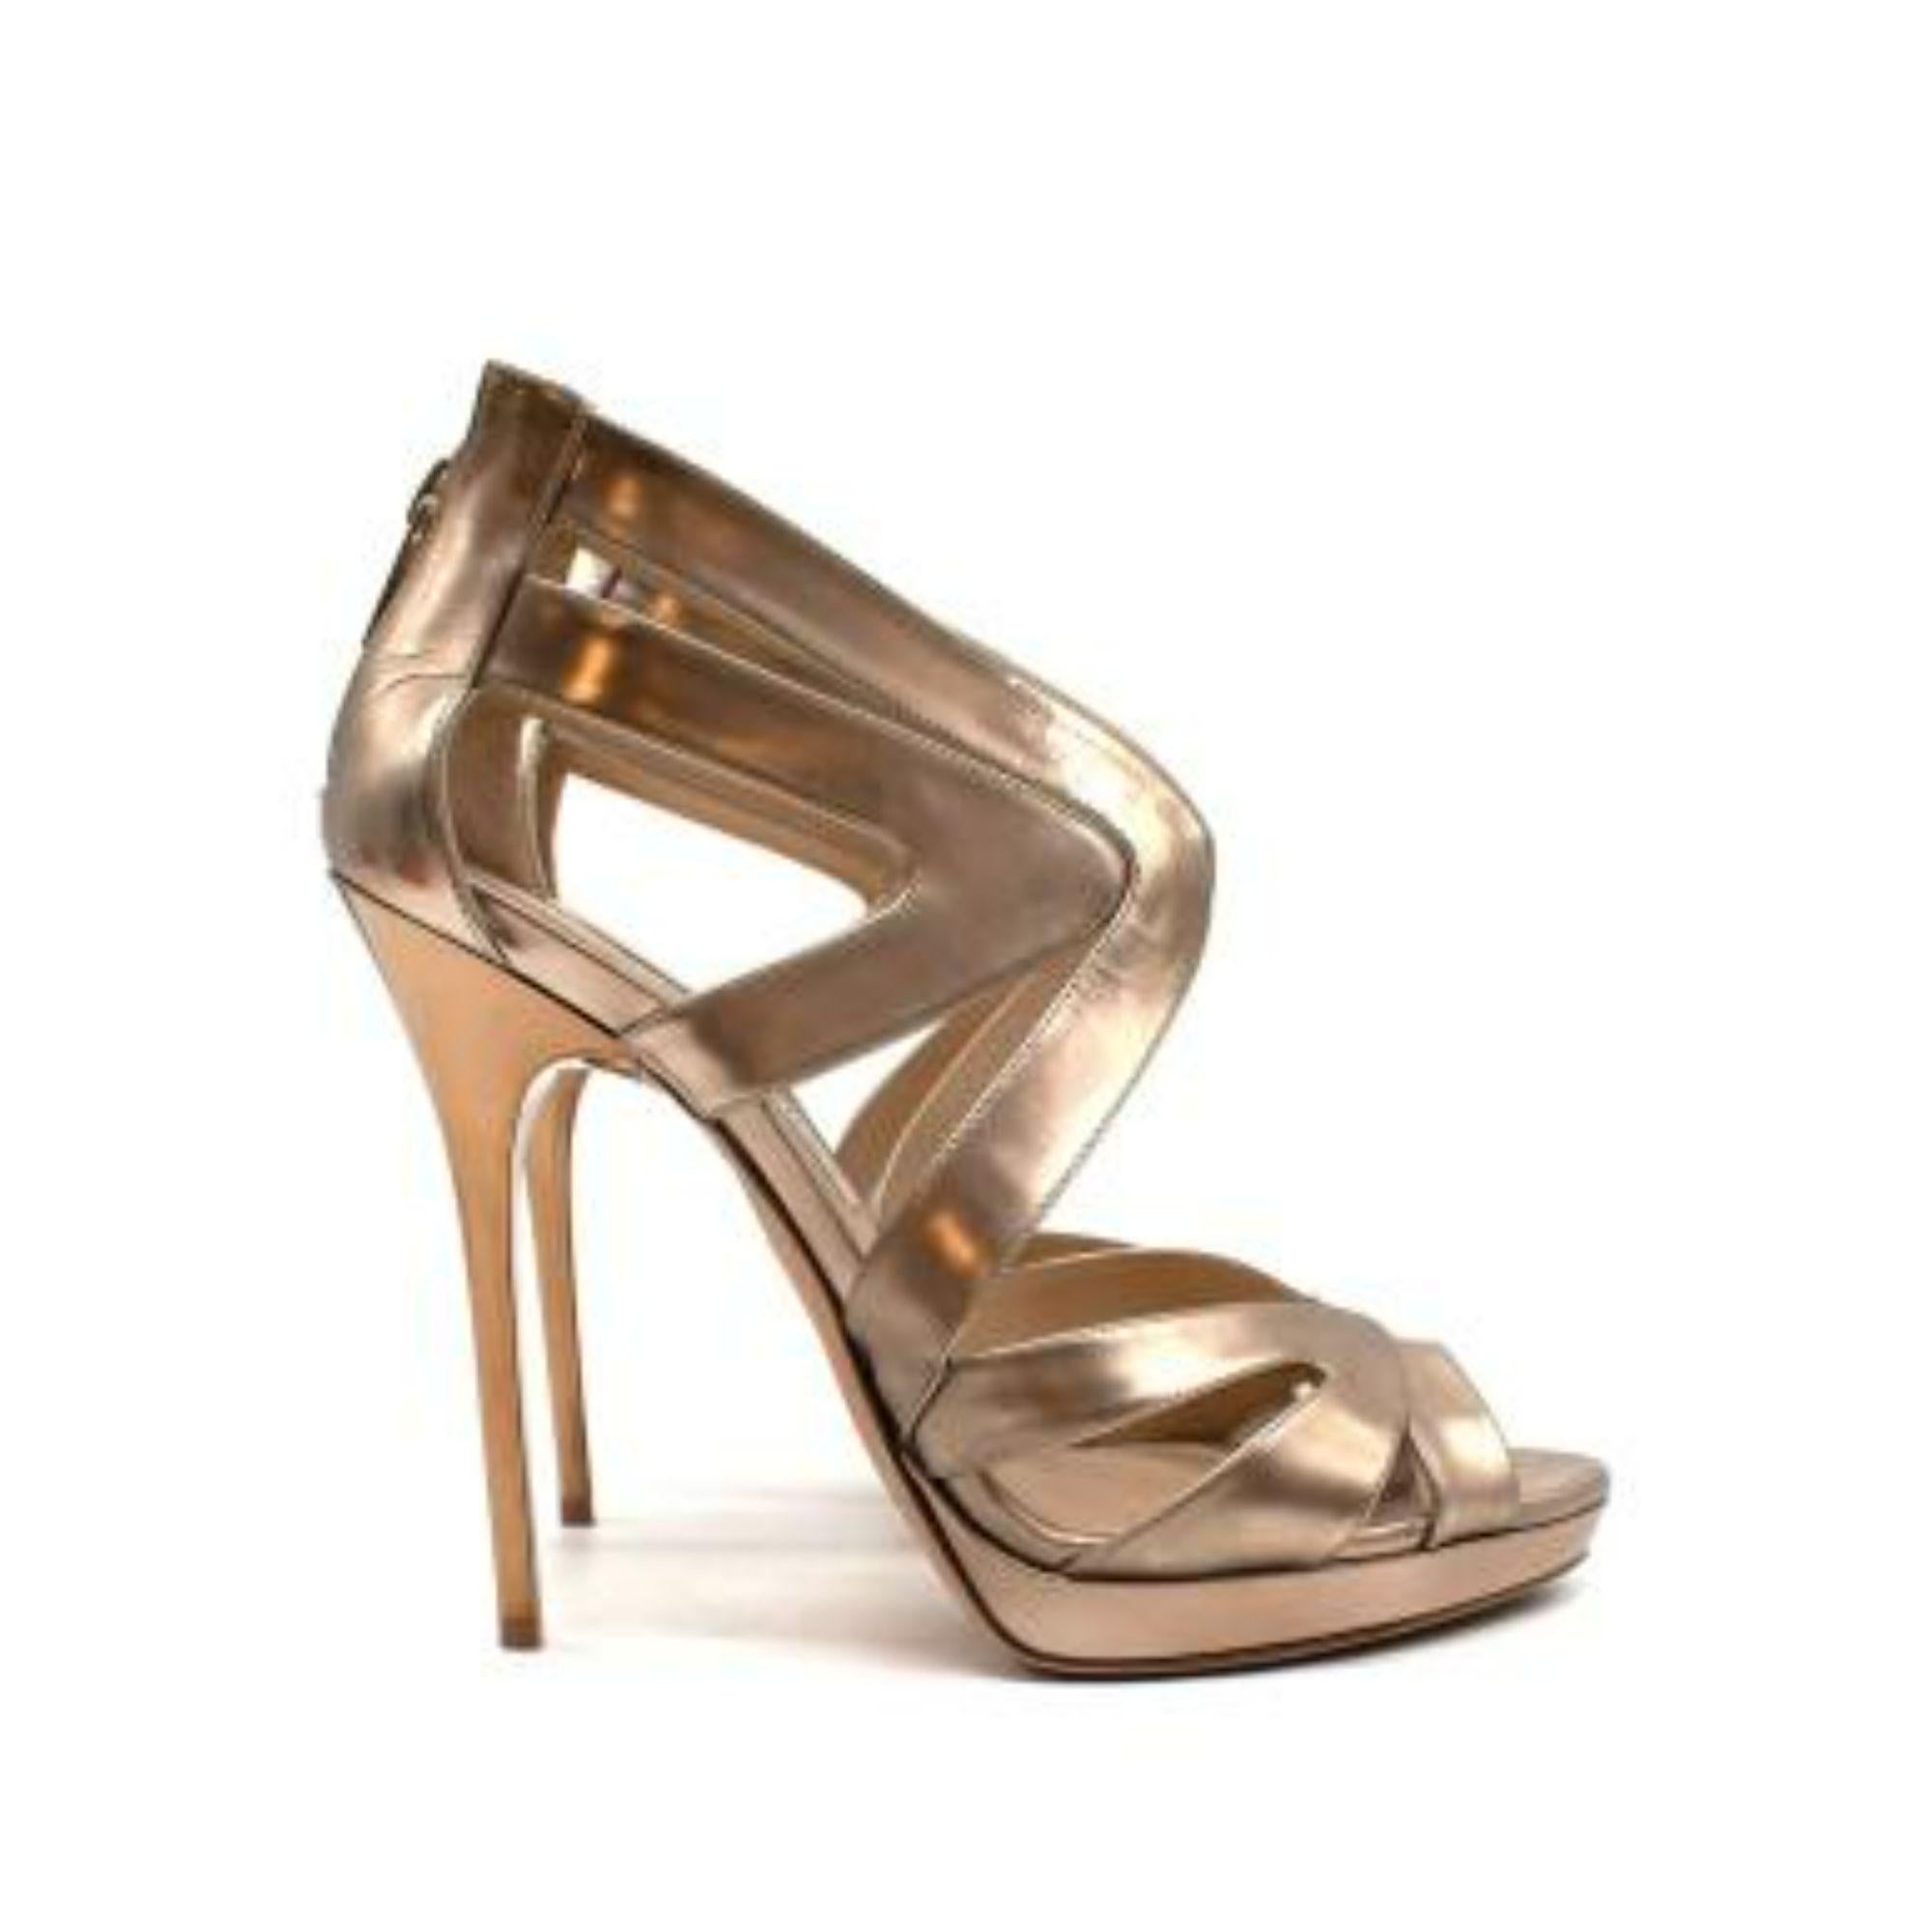 Jimmy Choo Gold Caged Heels

-Zip fastening Back 
-Open toe 
-Branded leather insoles 
-Almond toe 
-Caged body 

Material: 

Leather 

9.5/10 excellent conditions, please refer to images for further details. 

PLEASE NOTE, THESE ITEMS ARE PRE-OWNED